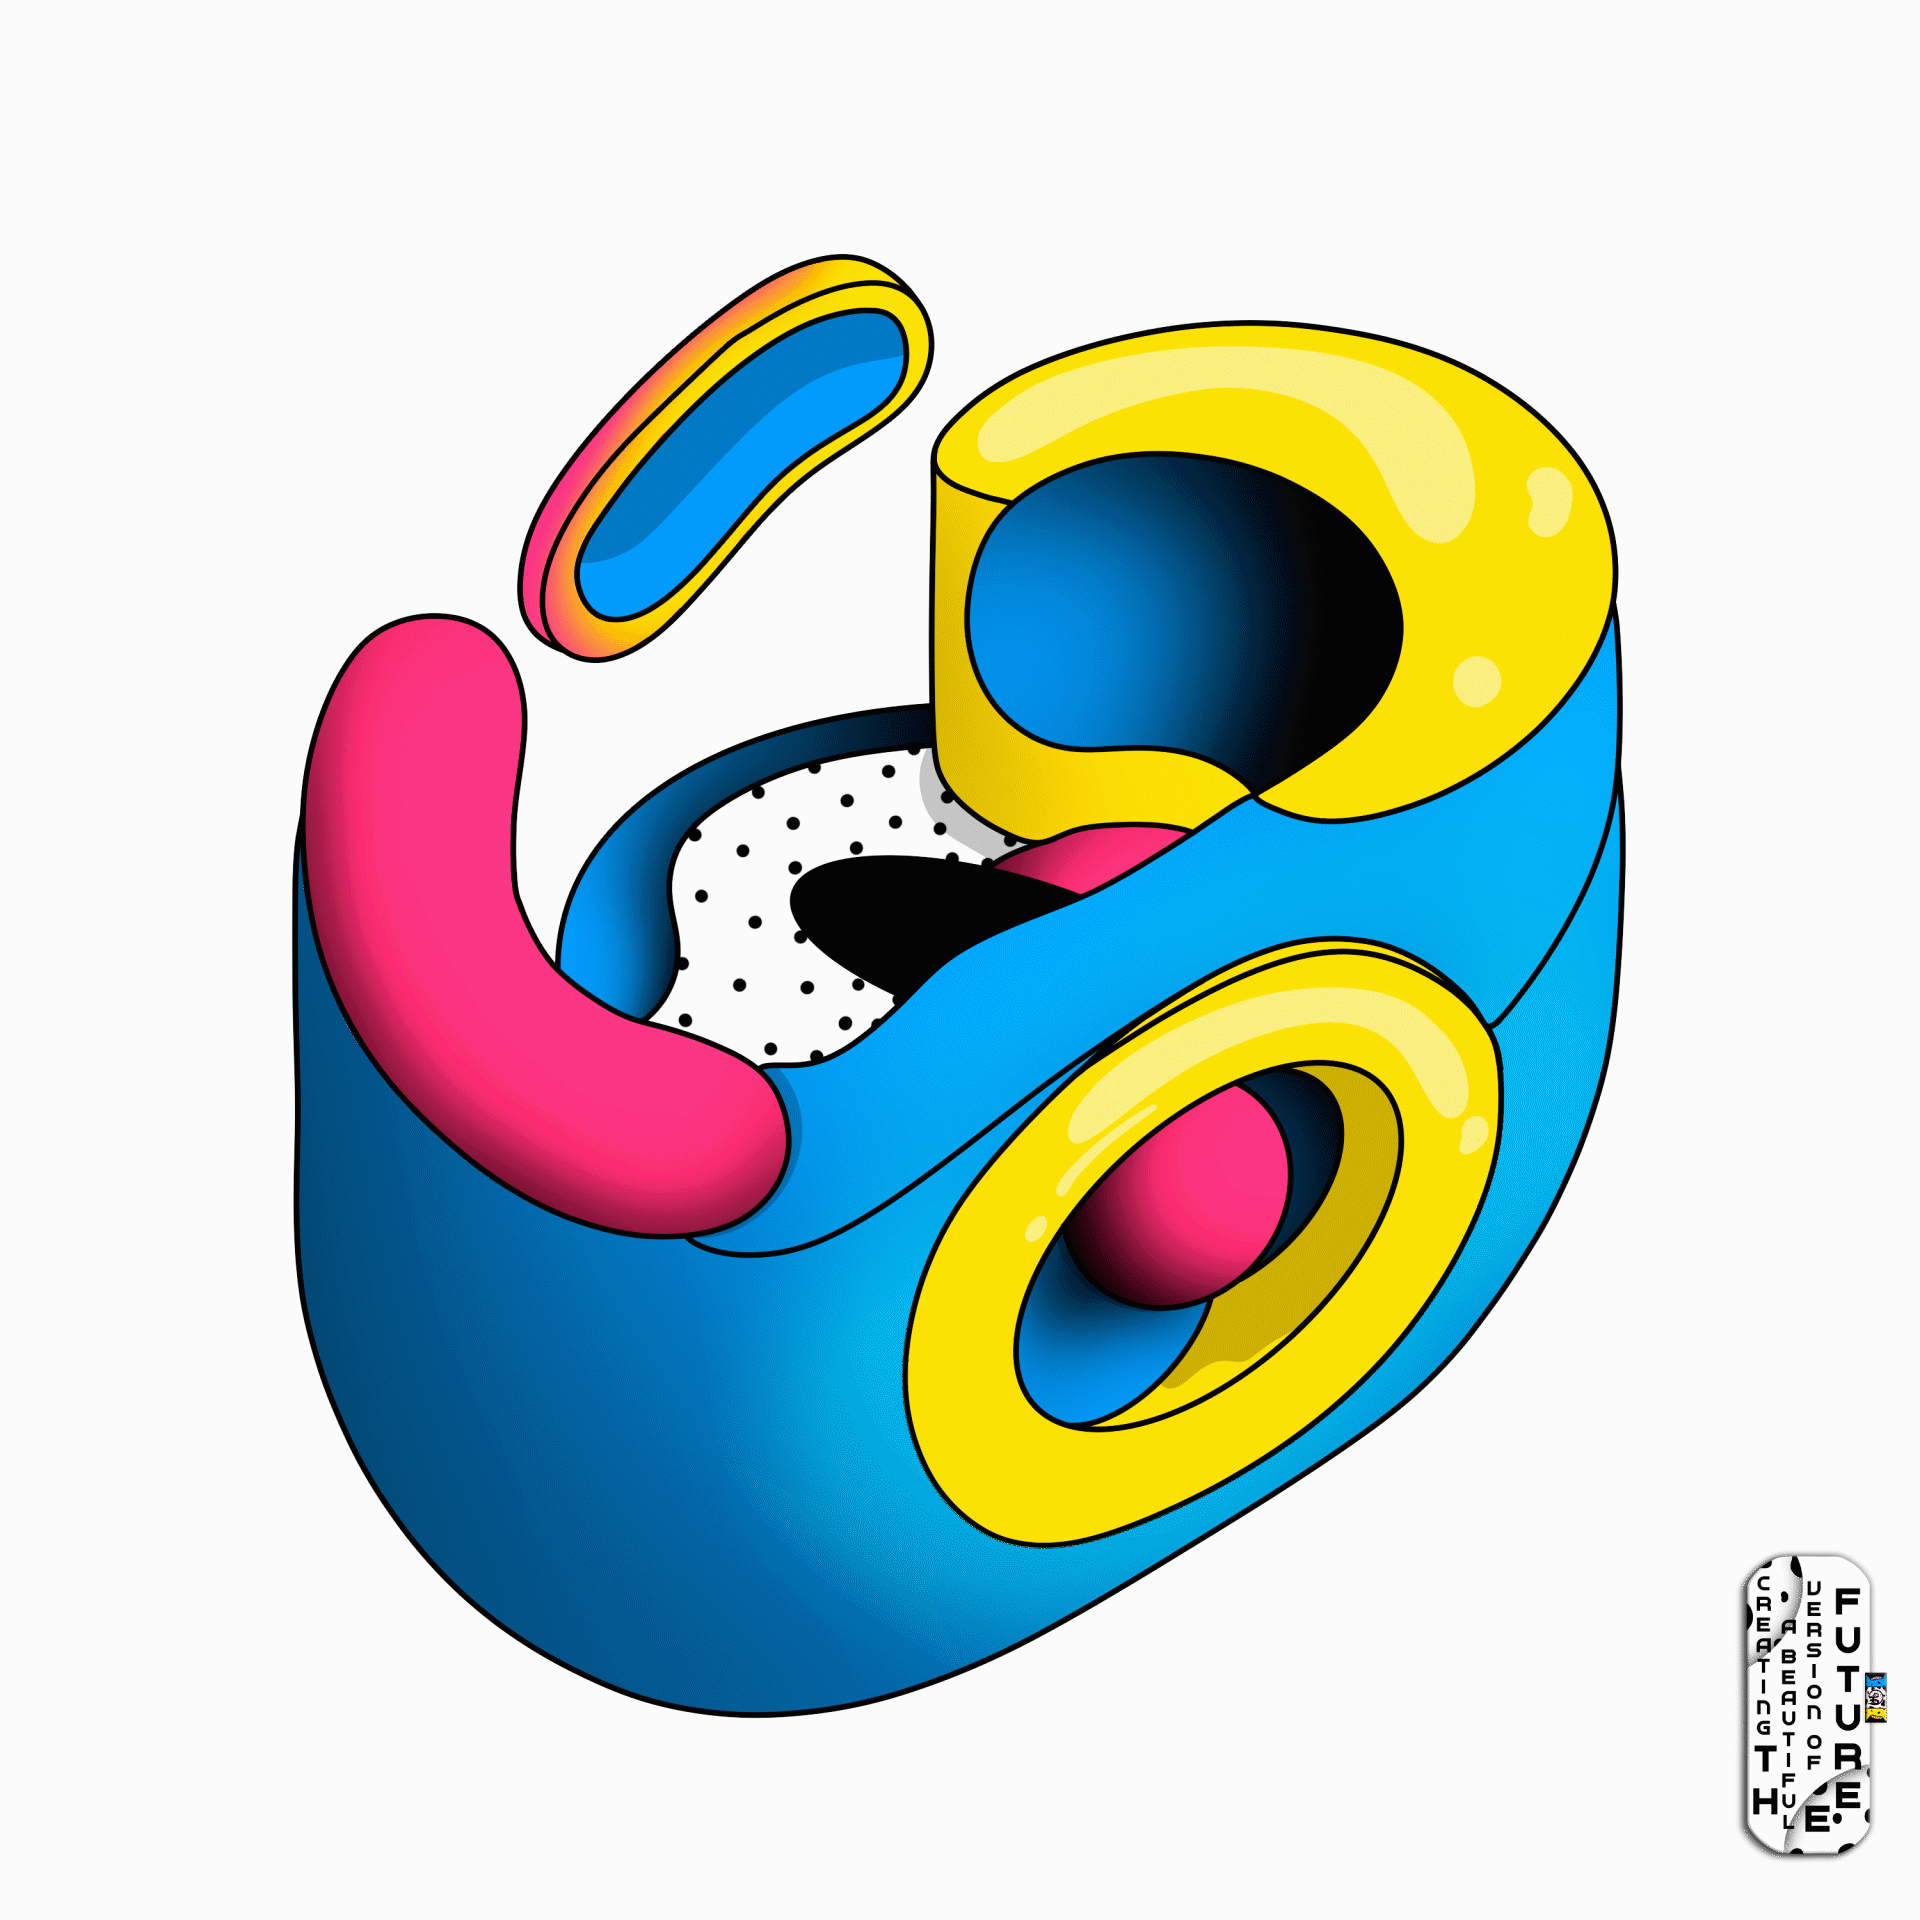 Funny Shapes #5